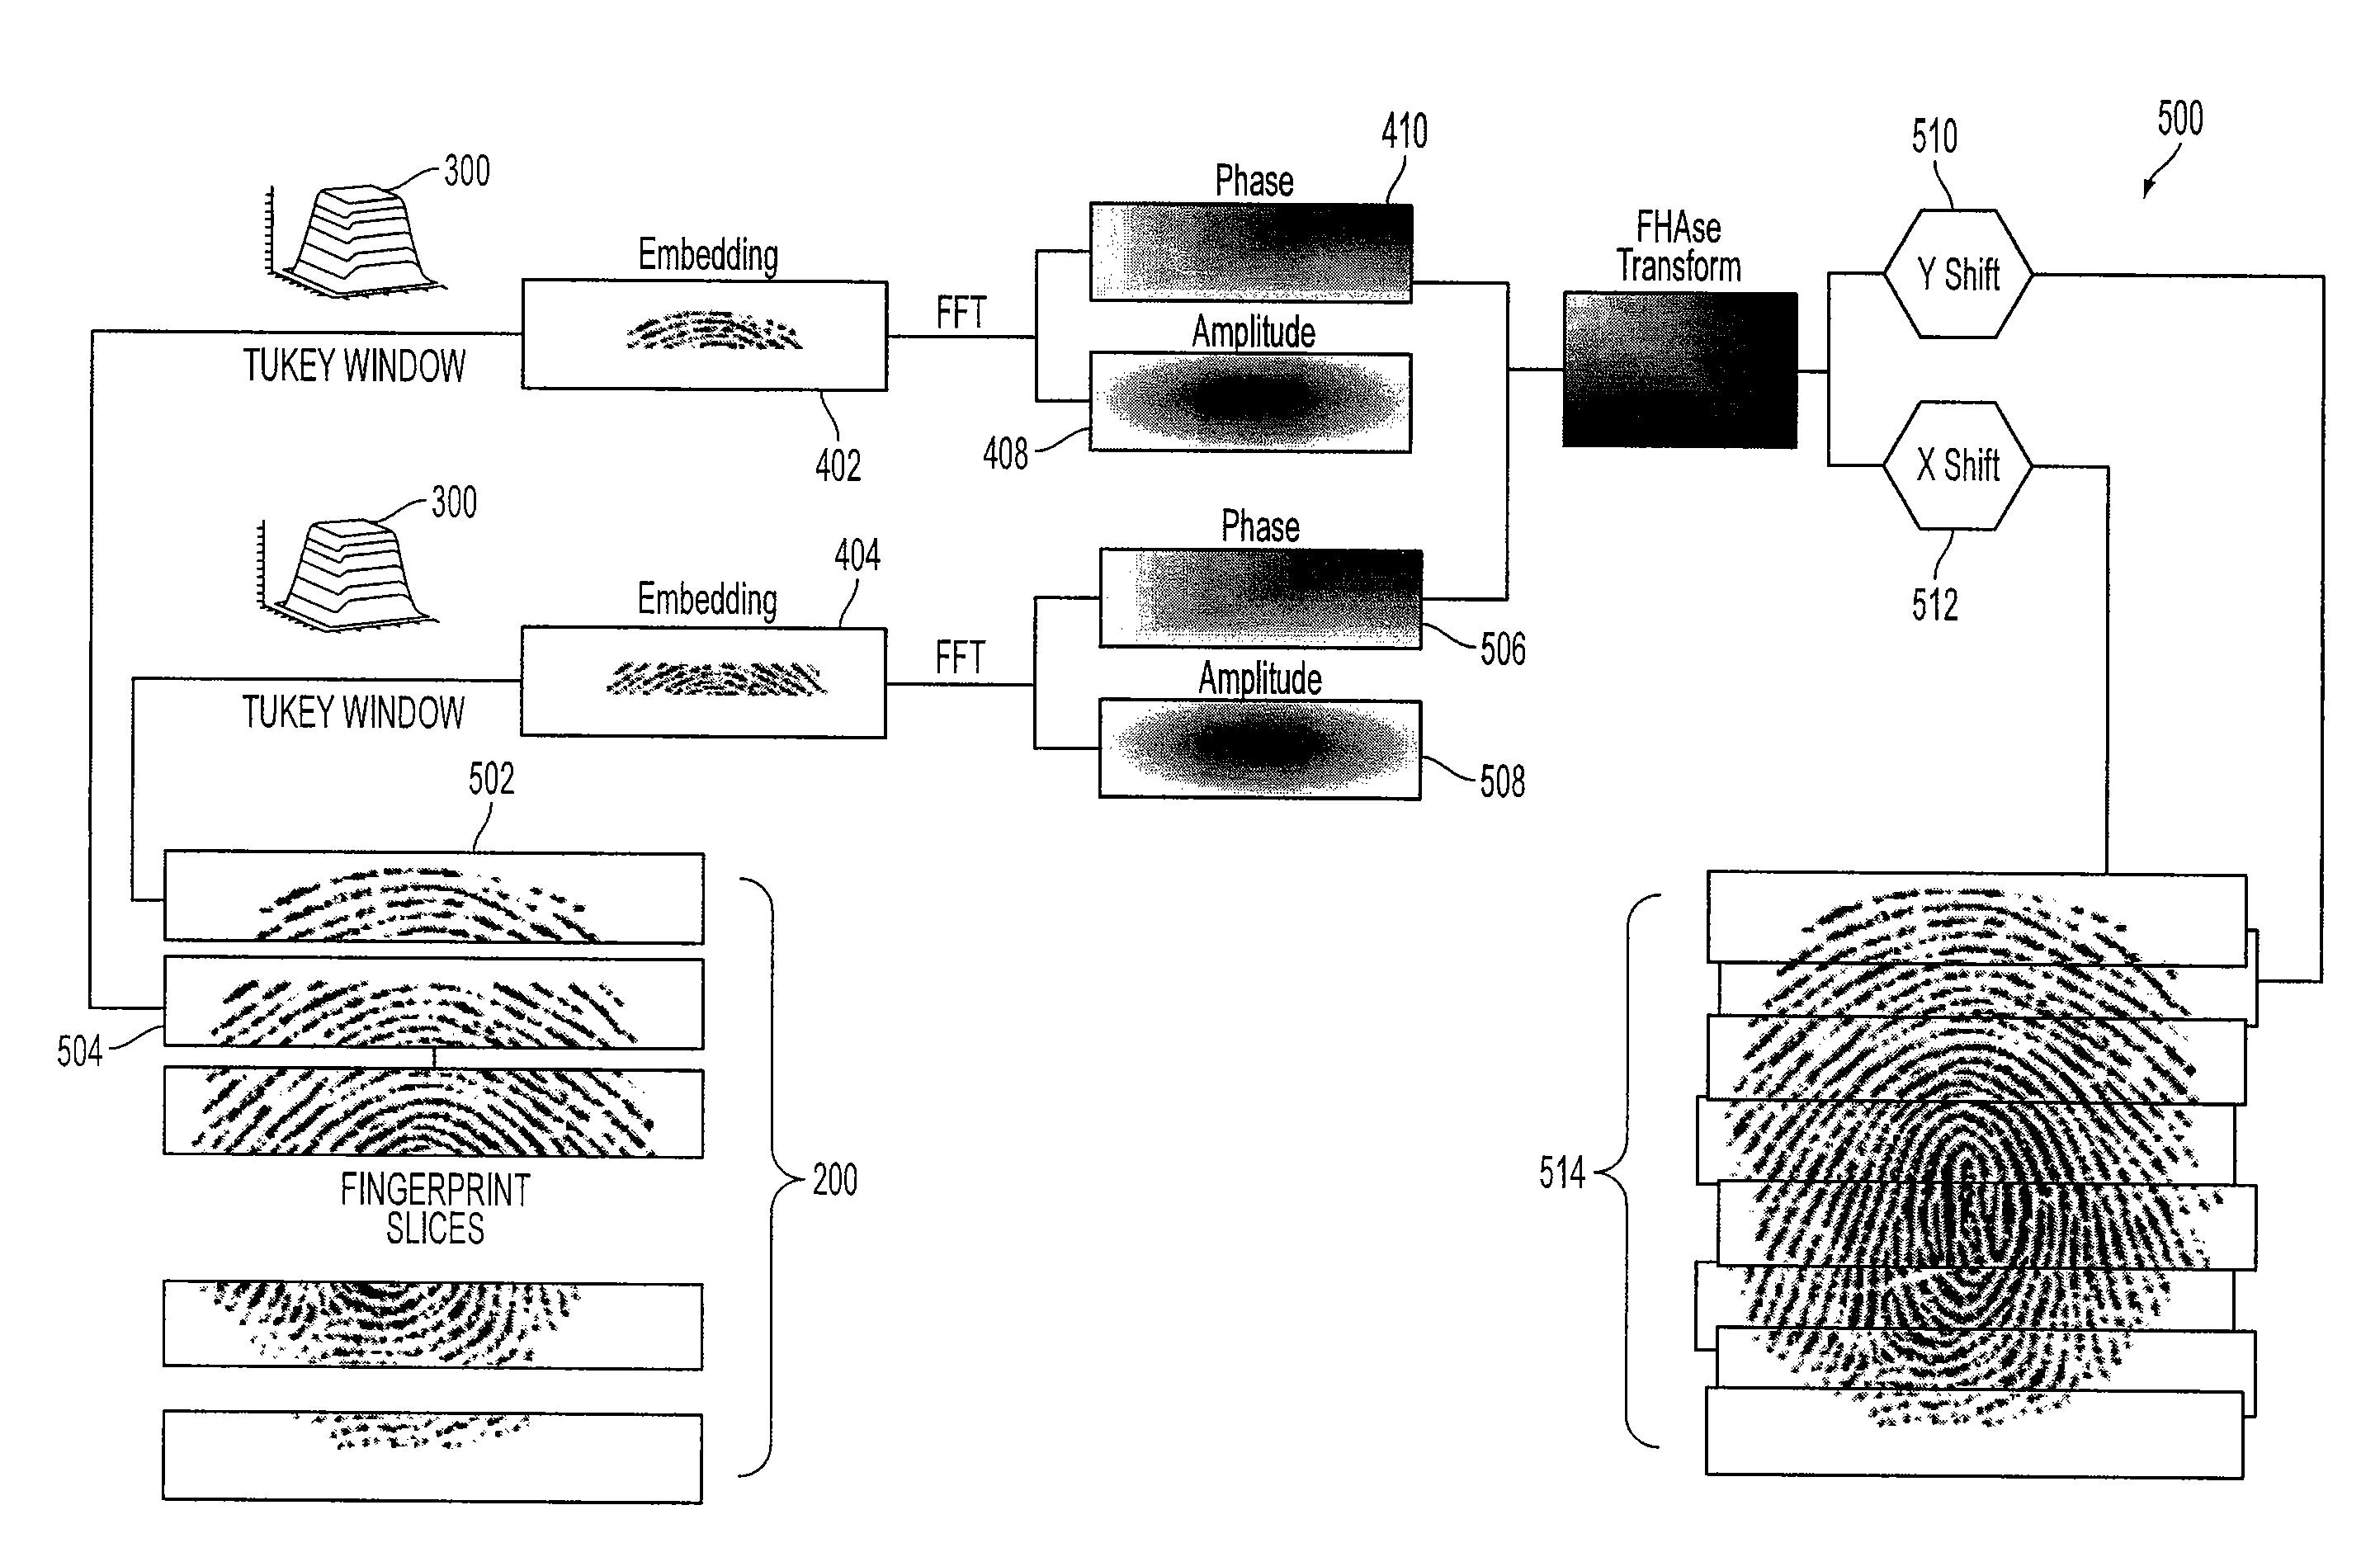 Method and system for swipe sensor image alignment using fourier phase analysis